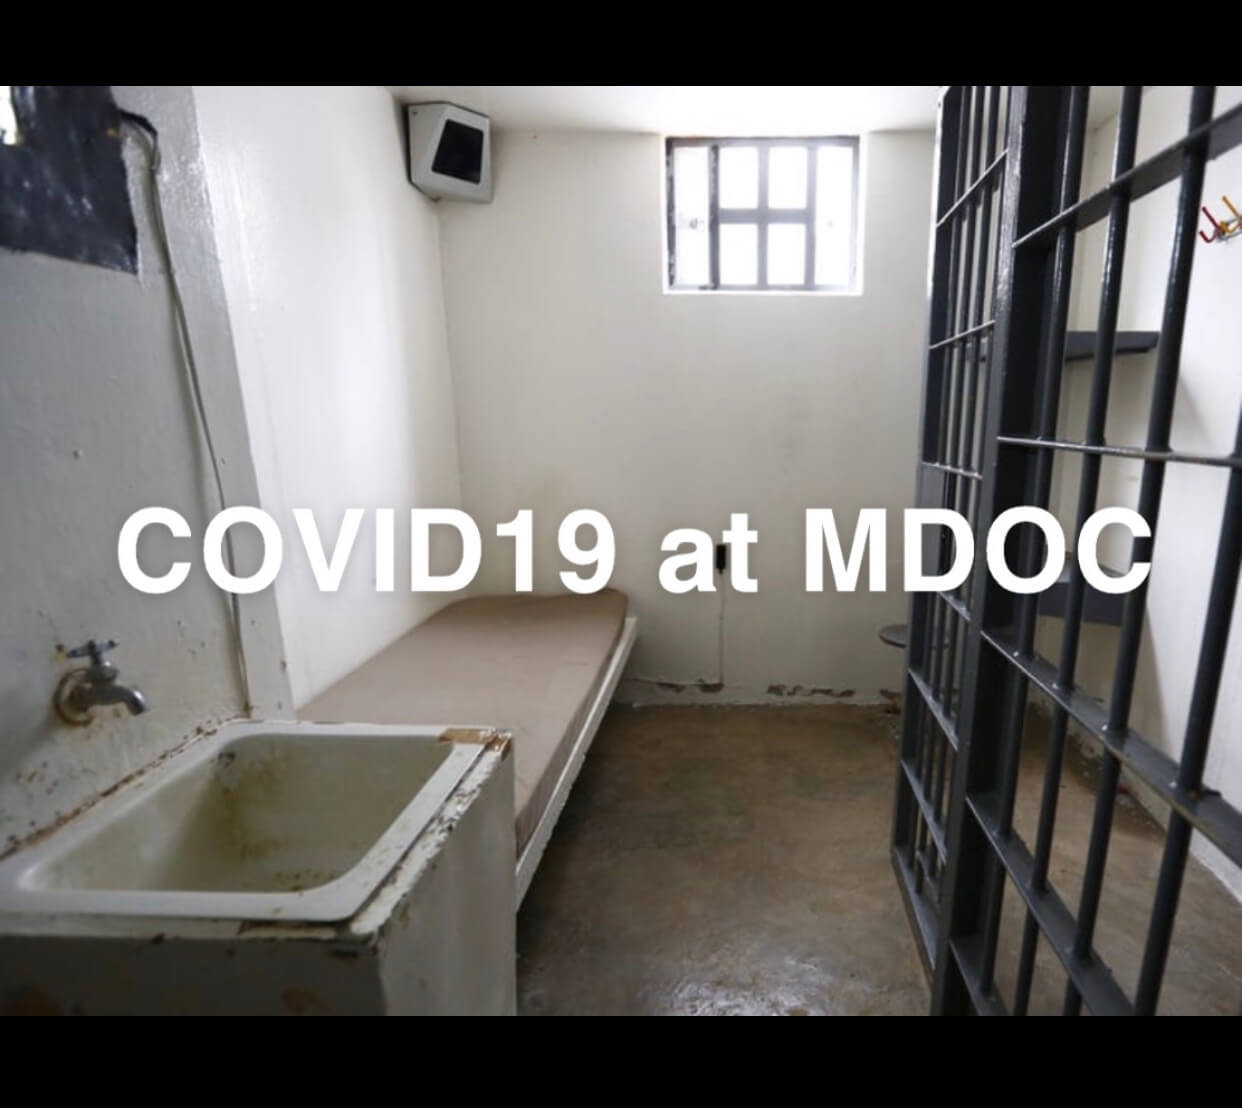 Four MDOC inmates have tested positive for COVID19 with one death